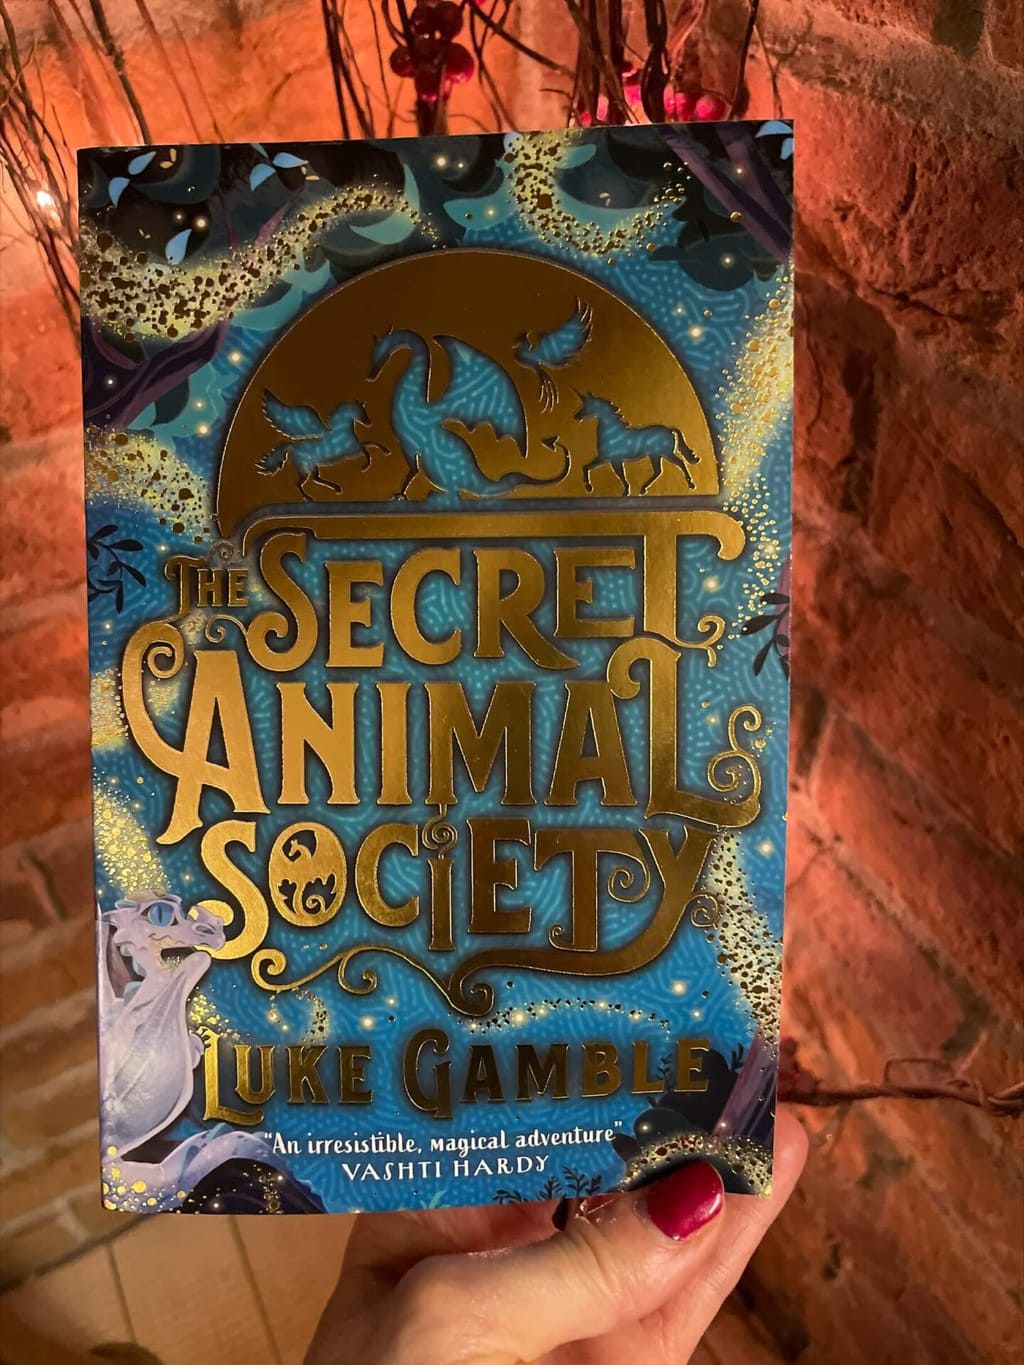 cret Animal Society – Luke Gamble (author), Jane Pica (illustrator, Scholastic Children’s Books (publisher), recommended reading age:  9-14 years